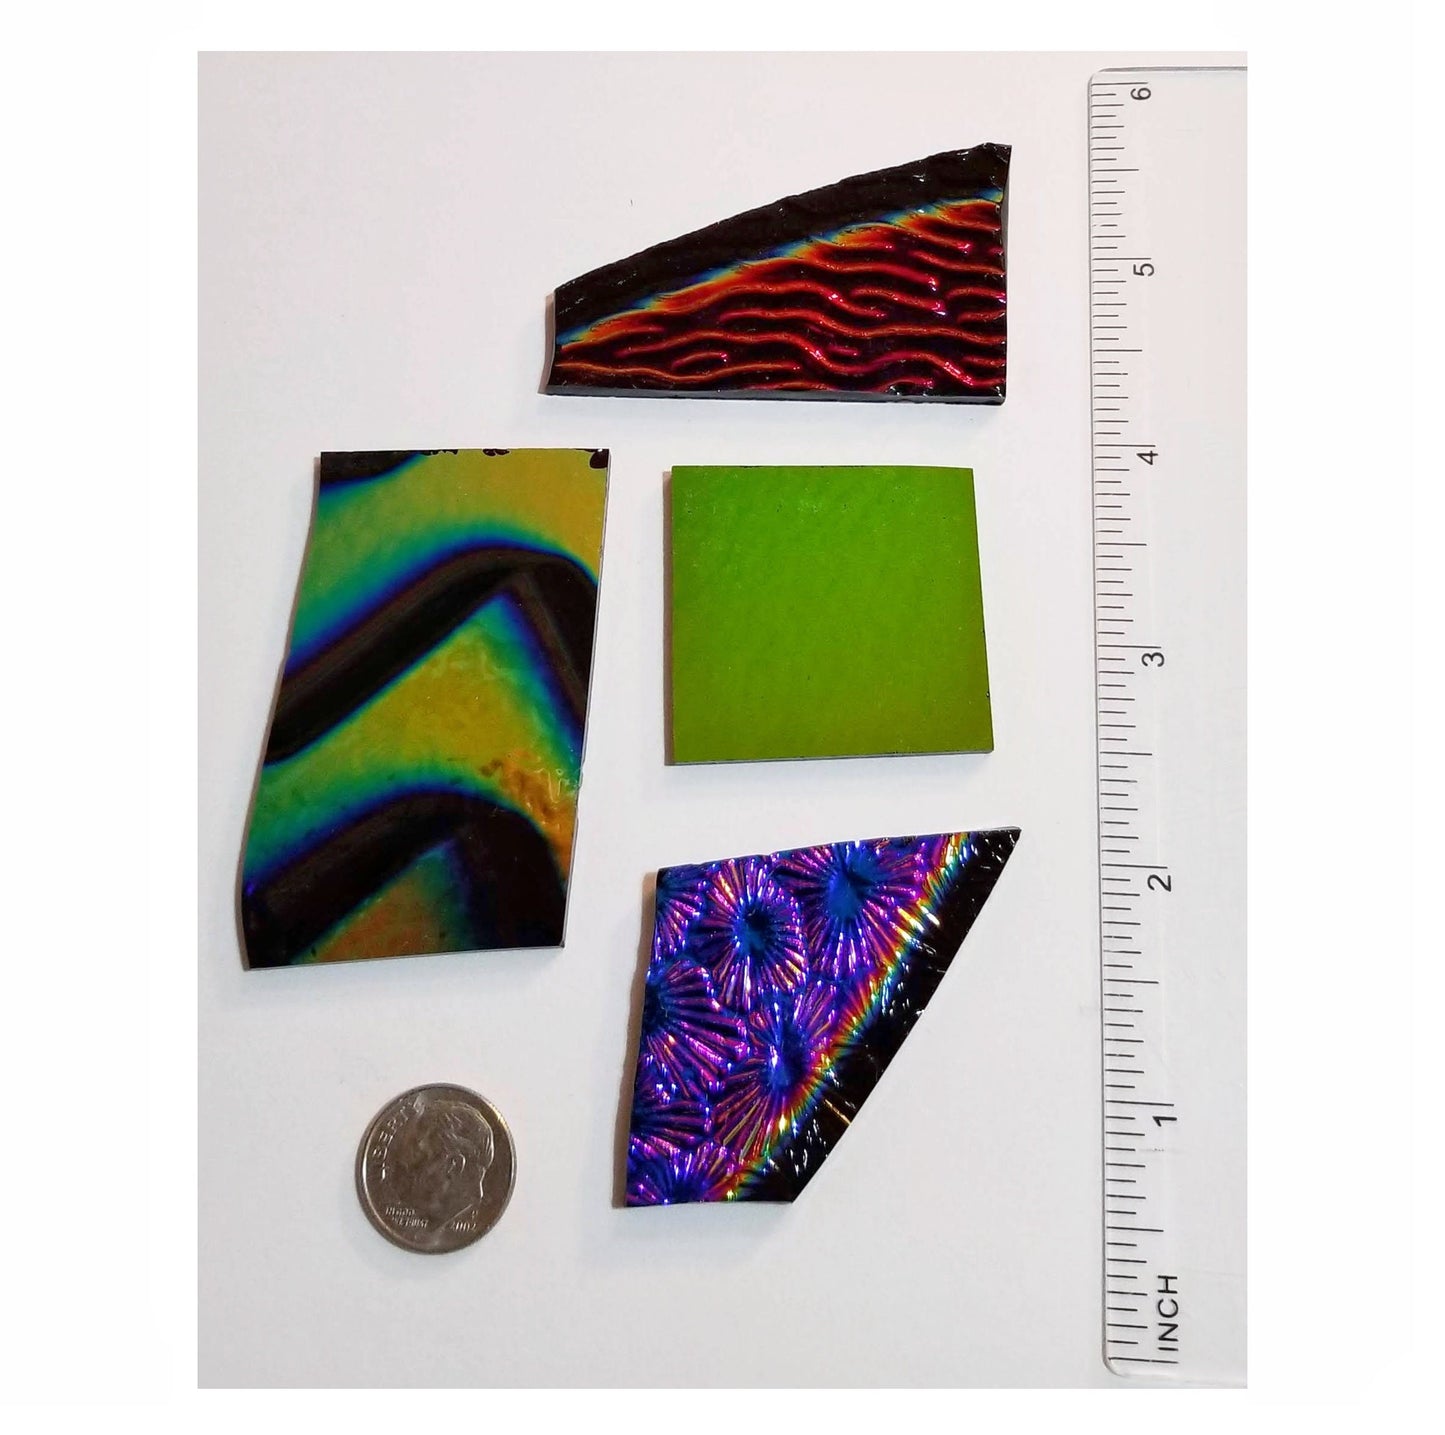 Dichroic Rainbow Glass on Black. Coe 90, Fusible Glass for Jewelry. 4 pieces, thin & thick sheets, Mosaic Pack, Crafts, Mixed Media Supply.